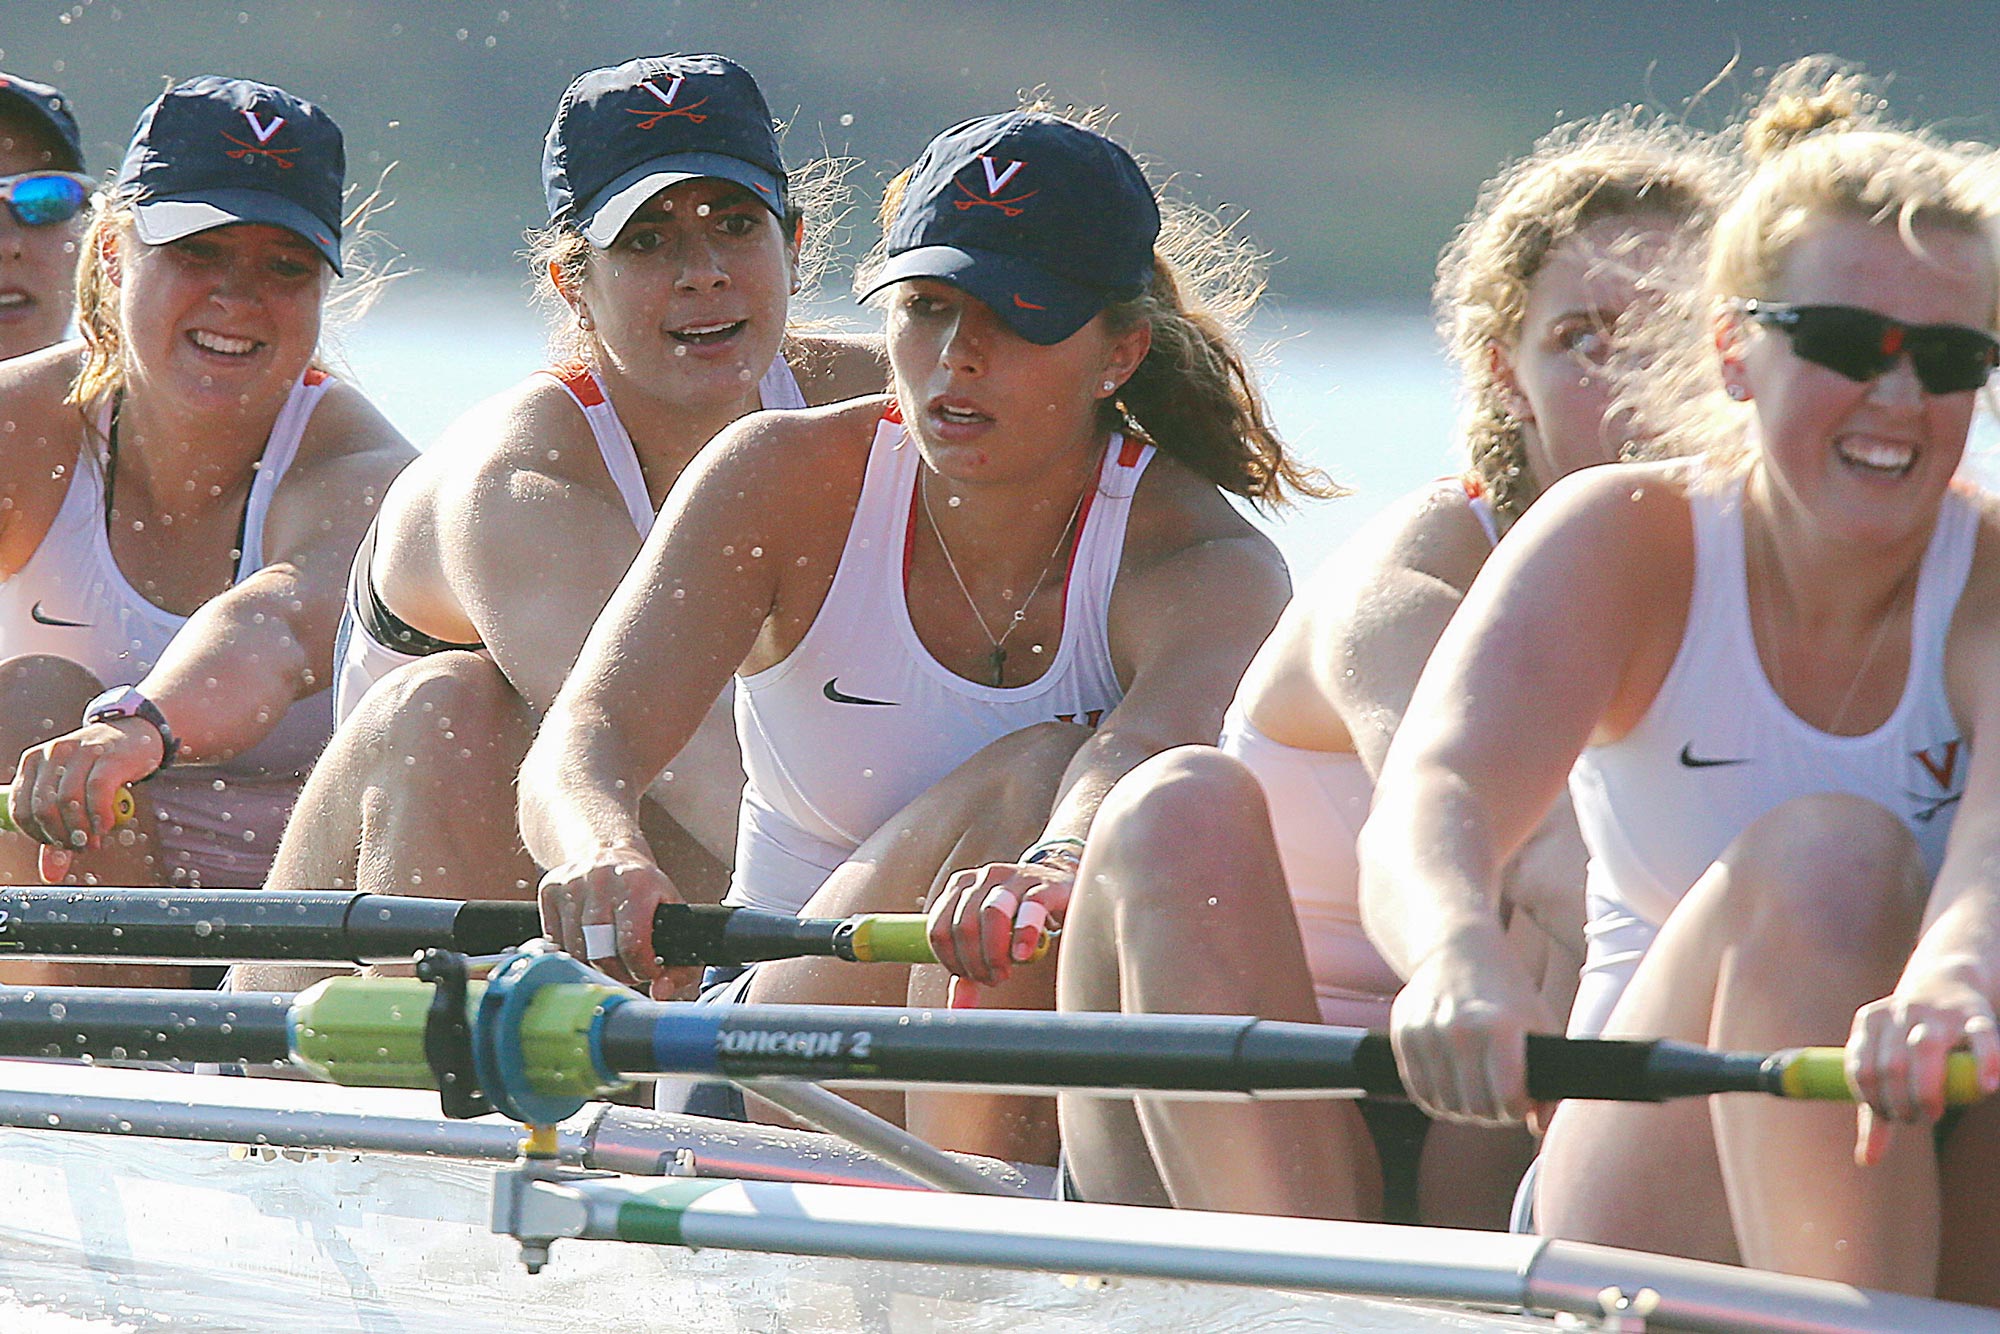 UVA Rowers rowing in the water